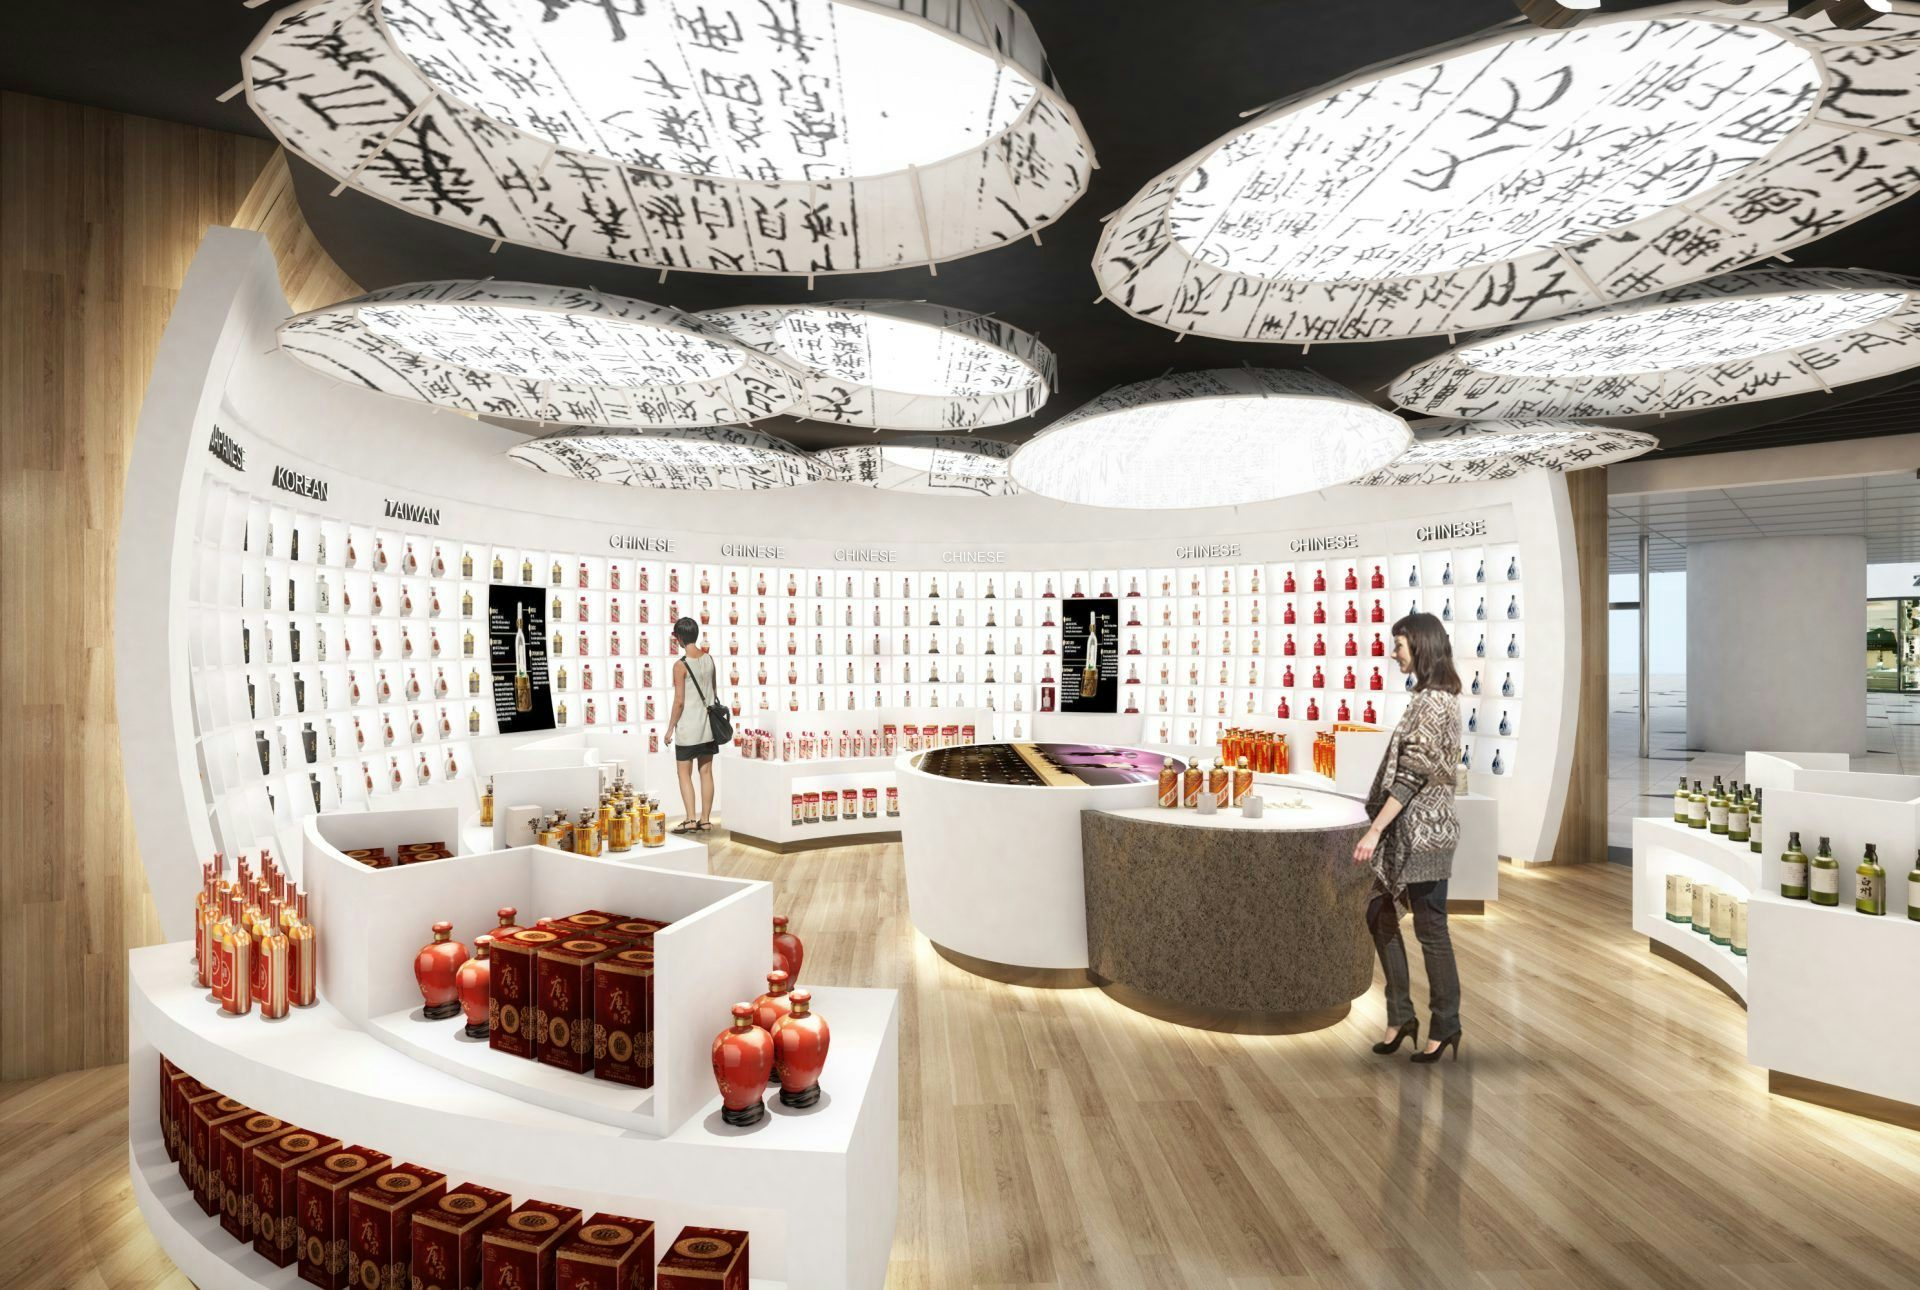 China Duty Free Group and Lagardère Travel Retail Welcome Hong Kong International Airport Duty-Free Liquor & Tobacco Win